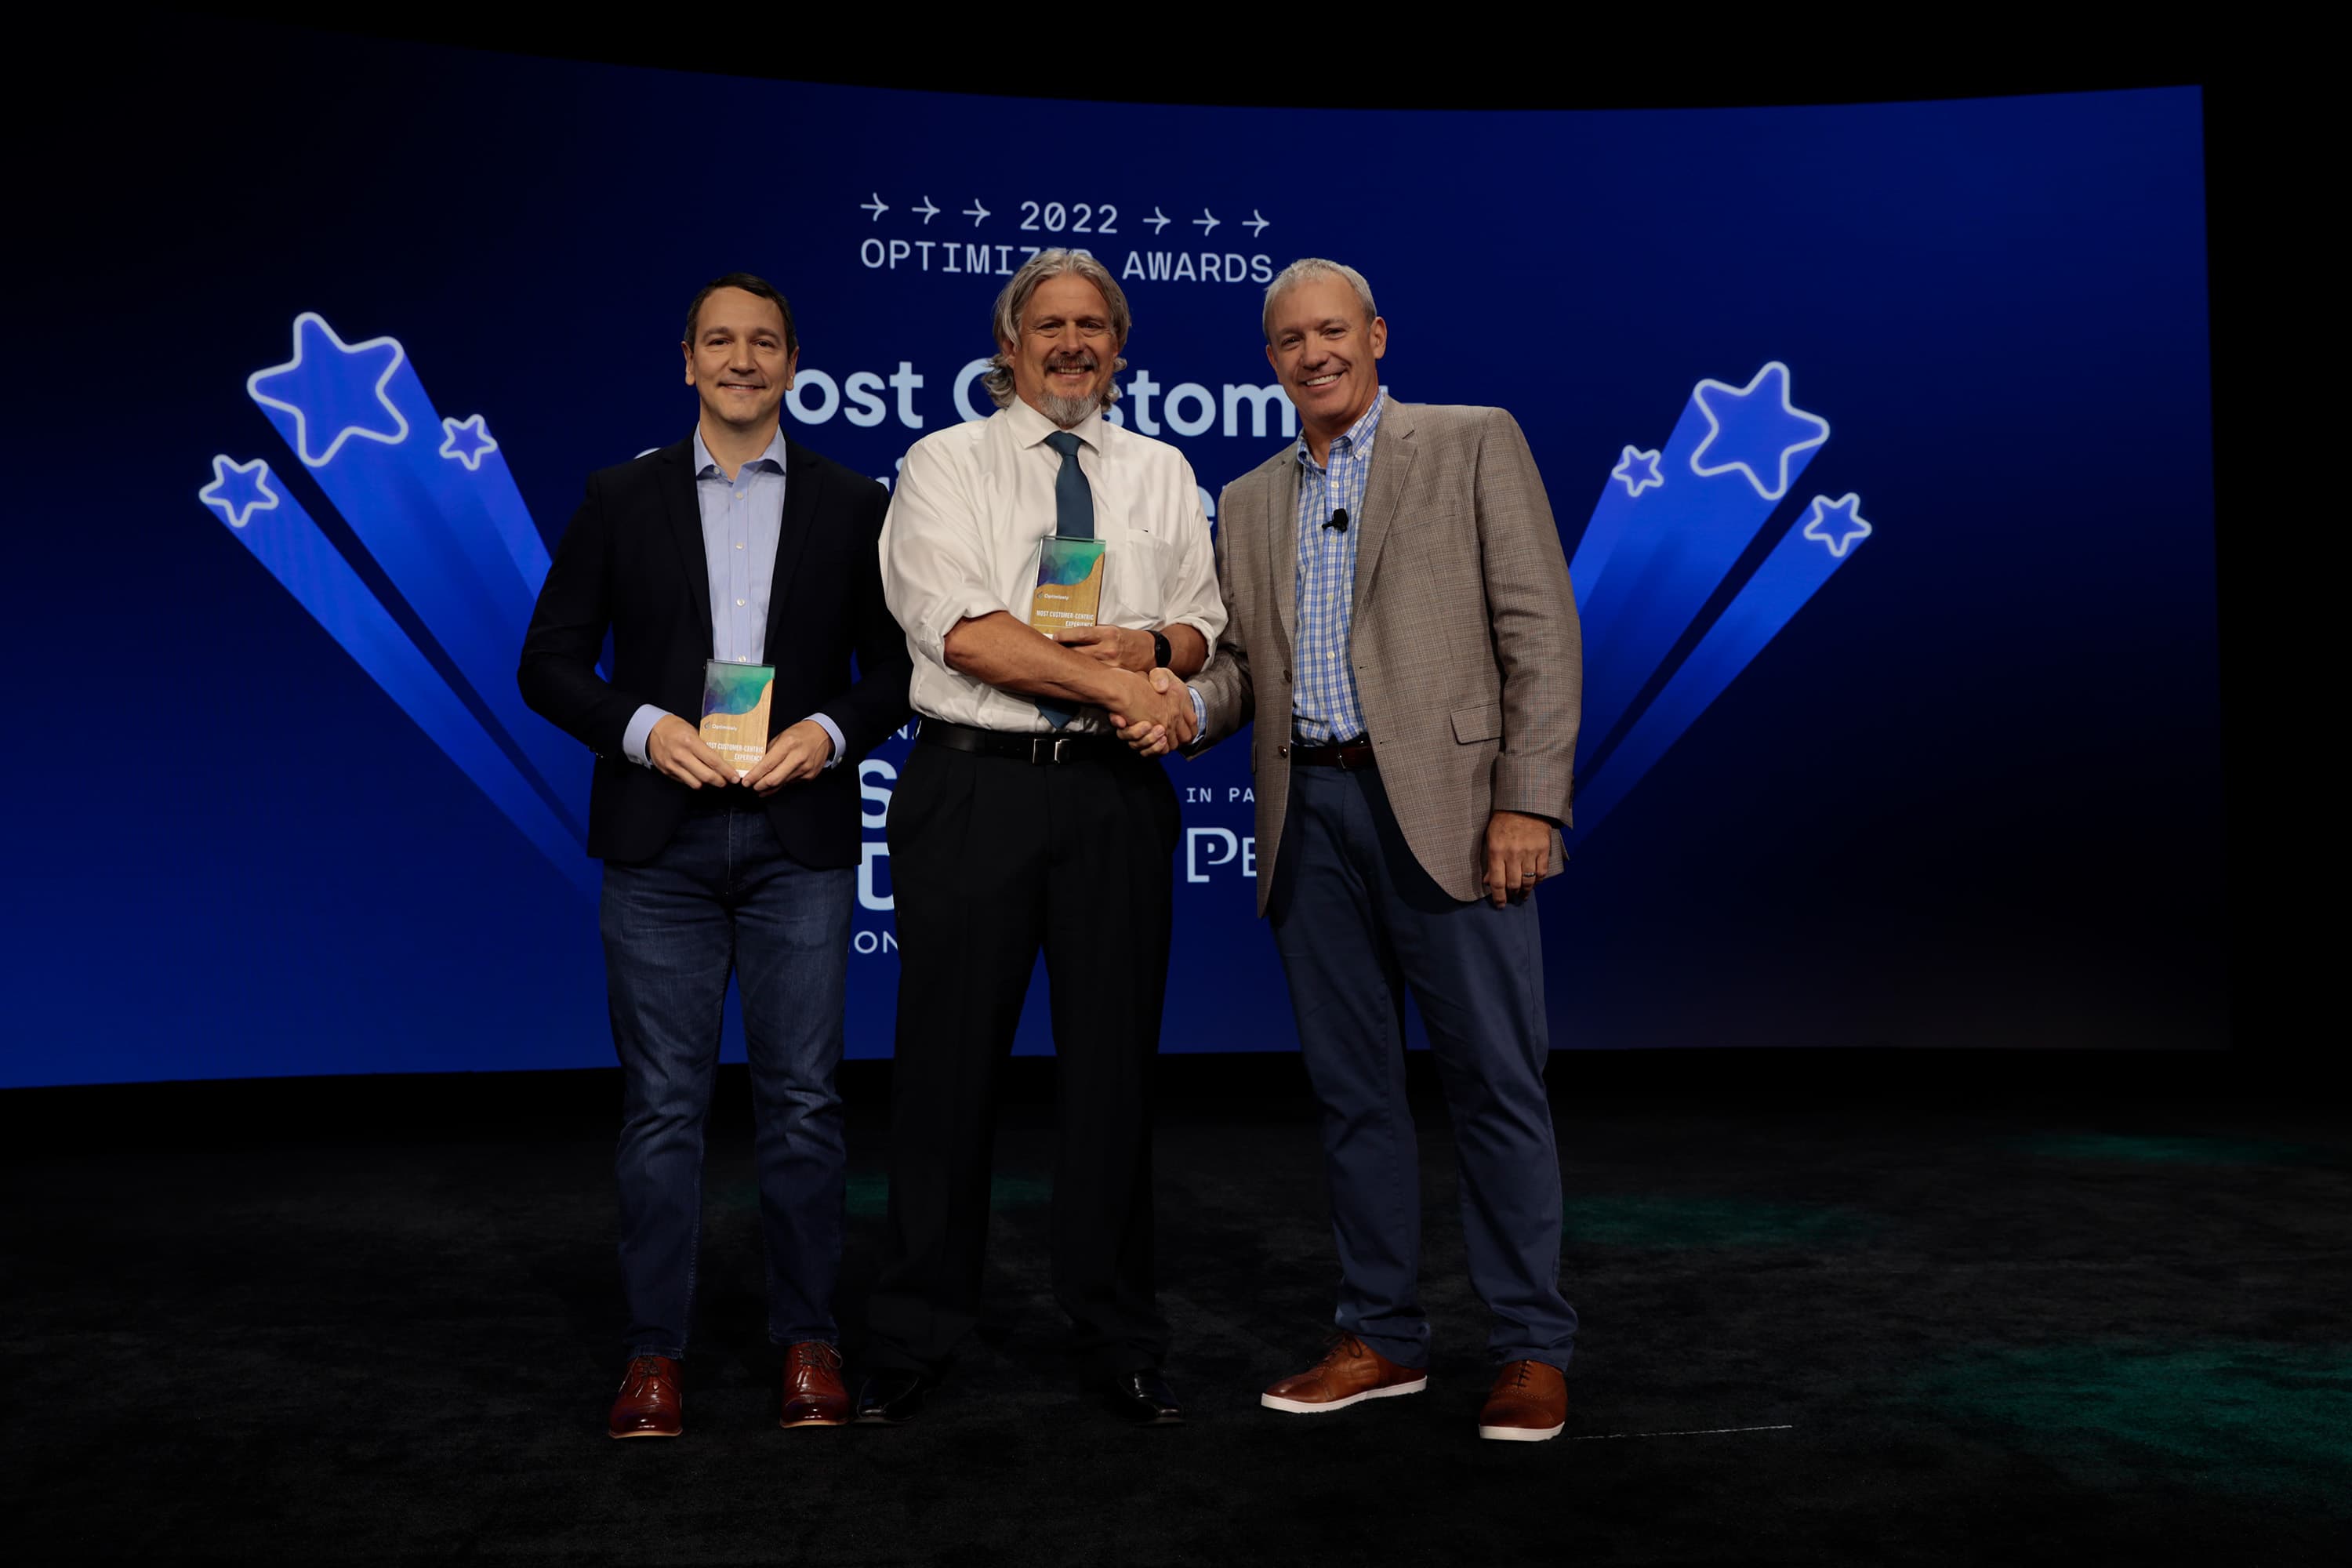 IFPA's Jim Rucinski accepts the Optimizely award for Most Customer Centric website with John Dymond of Perficient from Chad Wolf, EVP, Chief Customer Officer at Optimizely